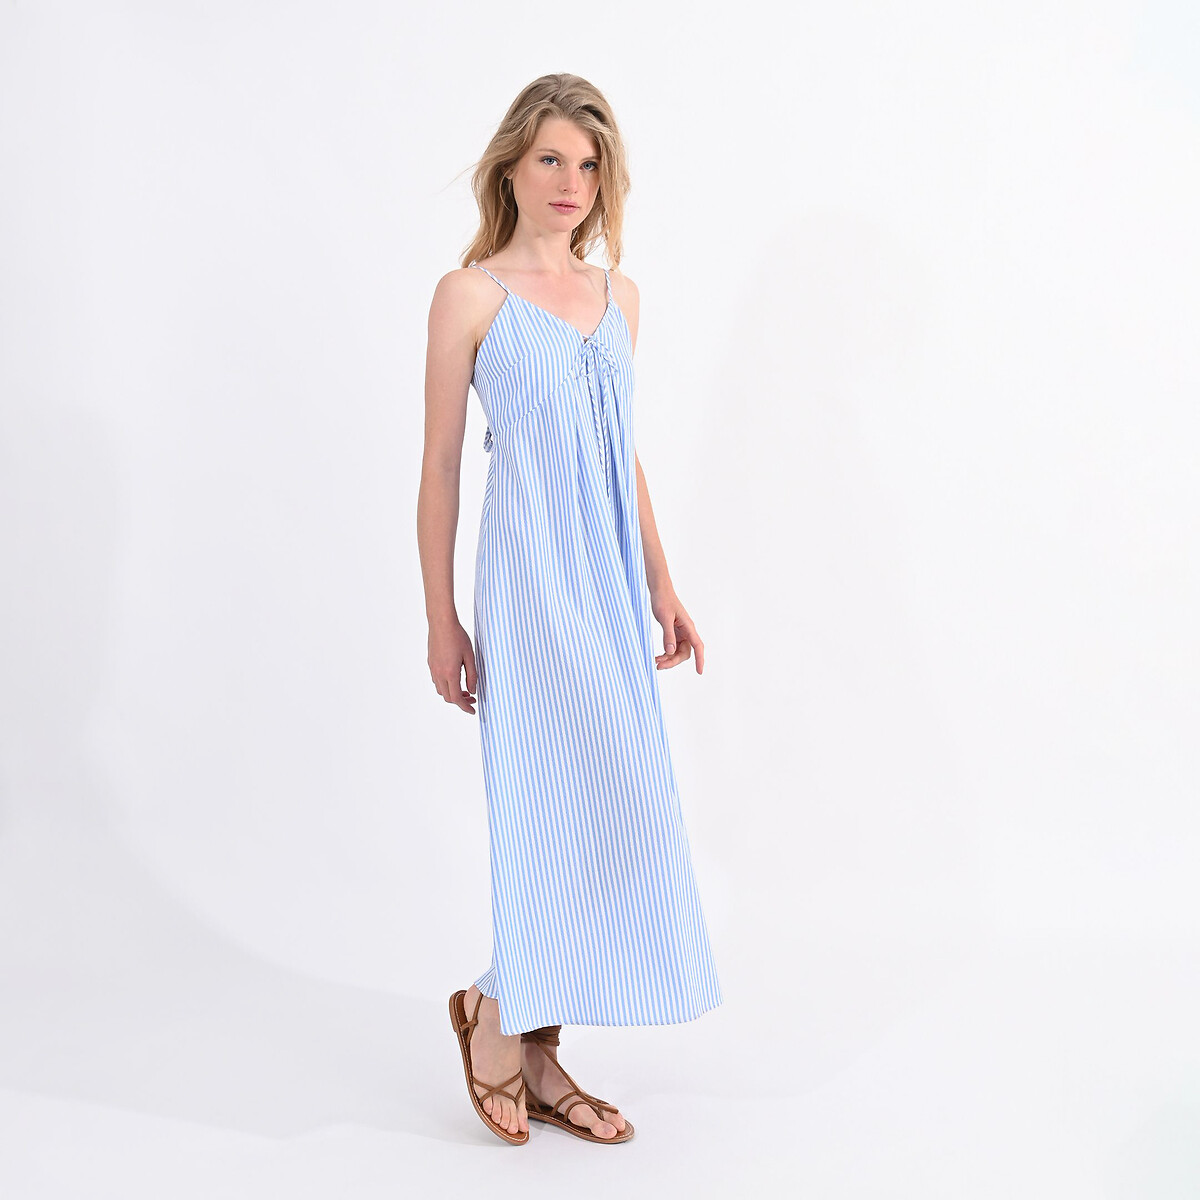 Let's explore the perfect blue summer dresses for every occasion. From breezy midi to elegant maxi styles, find your ideal blend of comfort and chic for unforgettable summer days and nights. Blue Summer Dress | Blue Summer Dress | Blue Summer Dresses | Summer Dress | Spring Dress | Blue Dress | Blue Outfit | Summer Dress Outfit | Light Blue Dress | Long Summer Dress | Cute Summer Dress | Baby Blue Dress | Blue Floral Dress | Blue Strip Dress